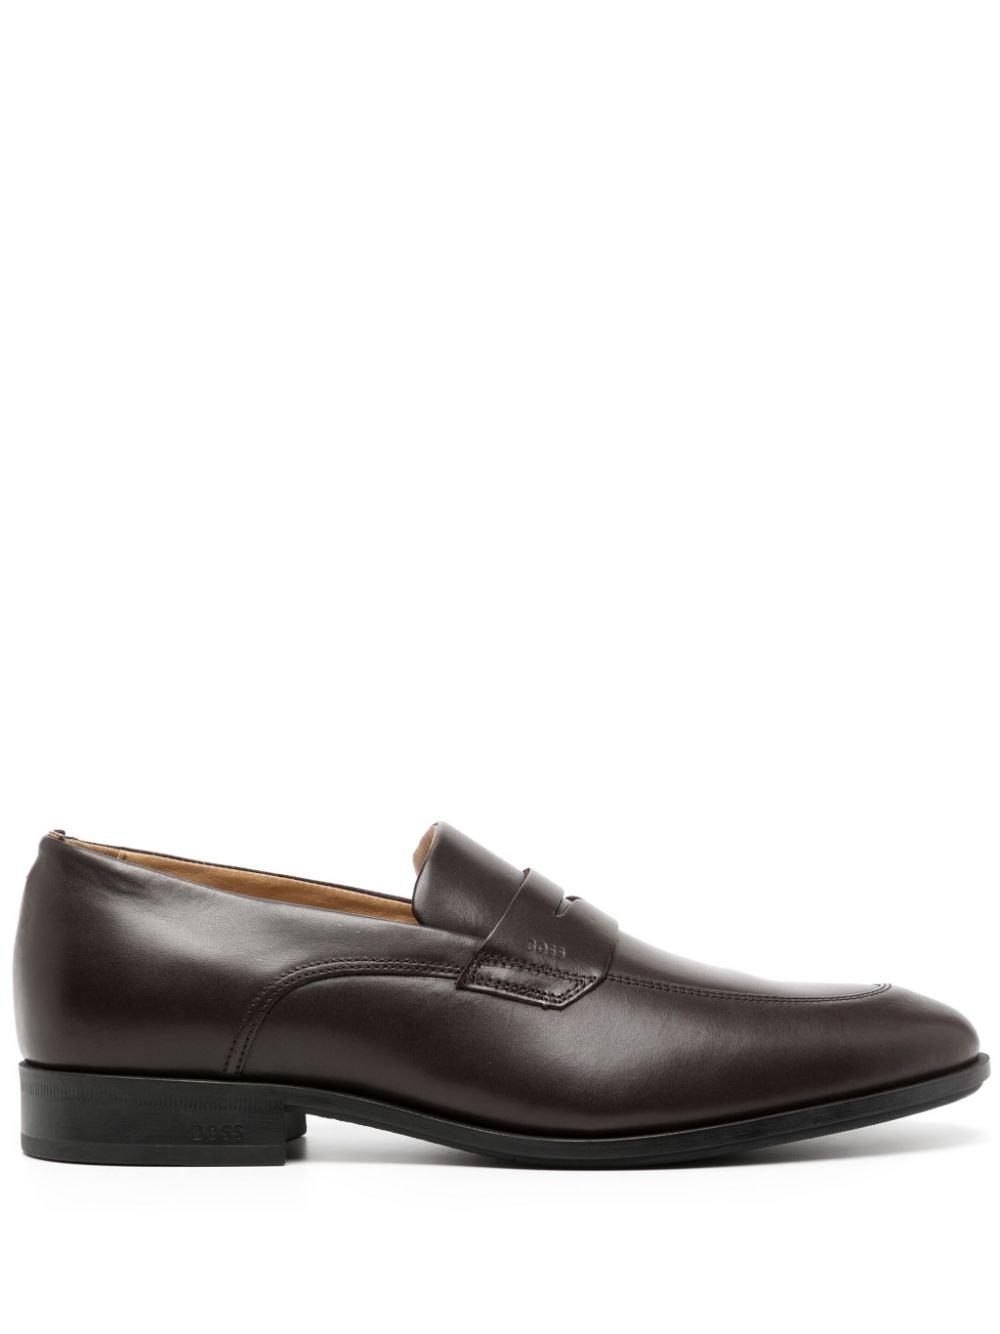 BOSS by HUGO BOSS Colby Leather Penny Loafers in Brown for Men | Lyst UK